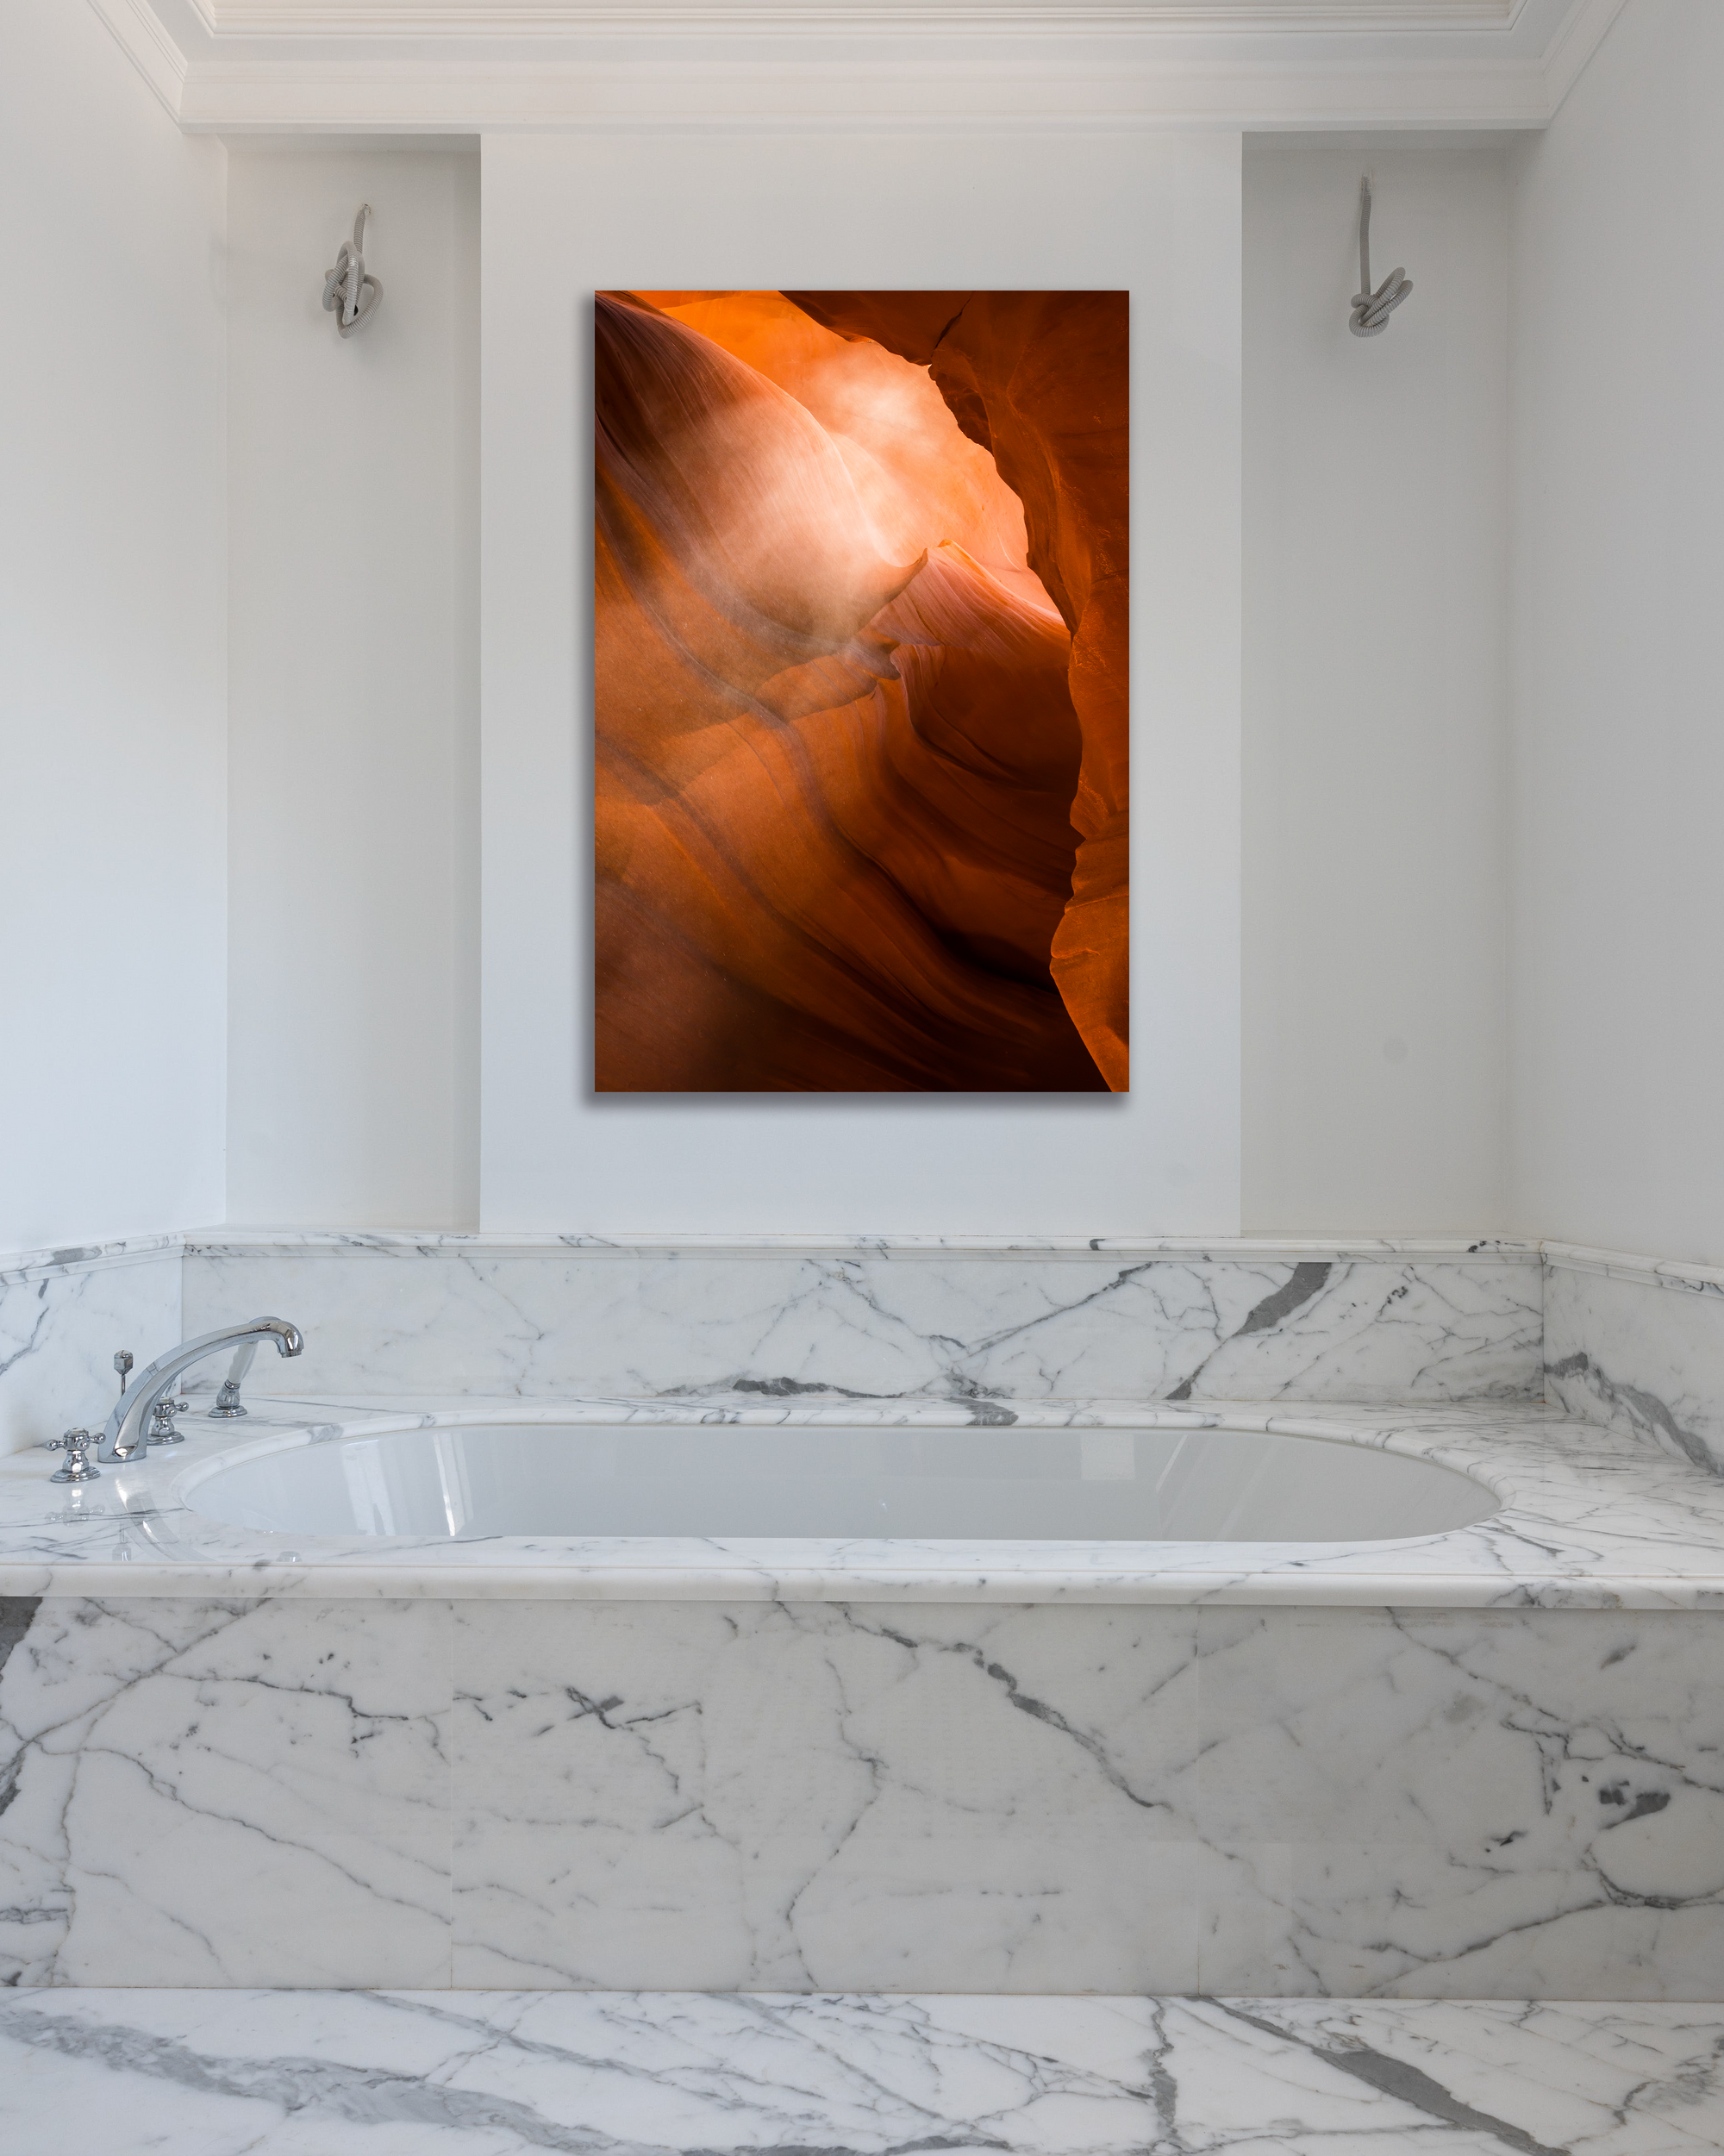 The vibrant orange canyon walls Antelope Canyon are showcase in a photograph hung above a marbled bathtub.